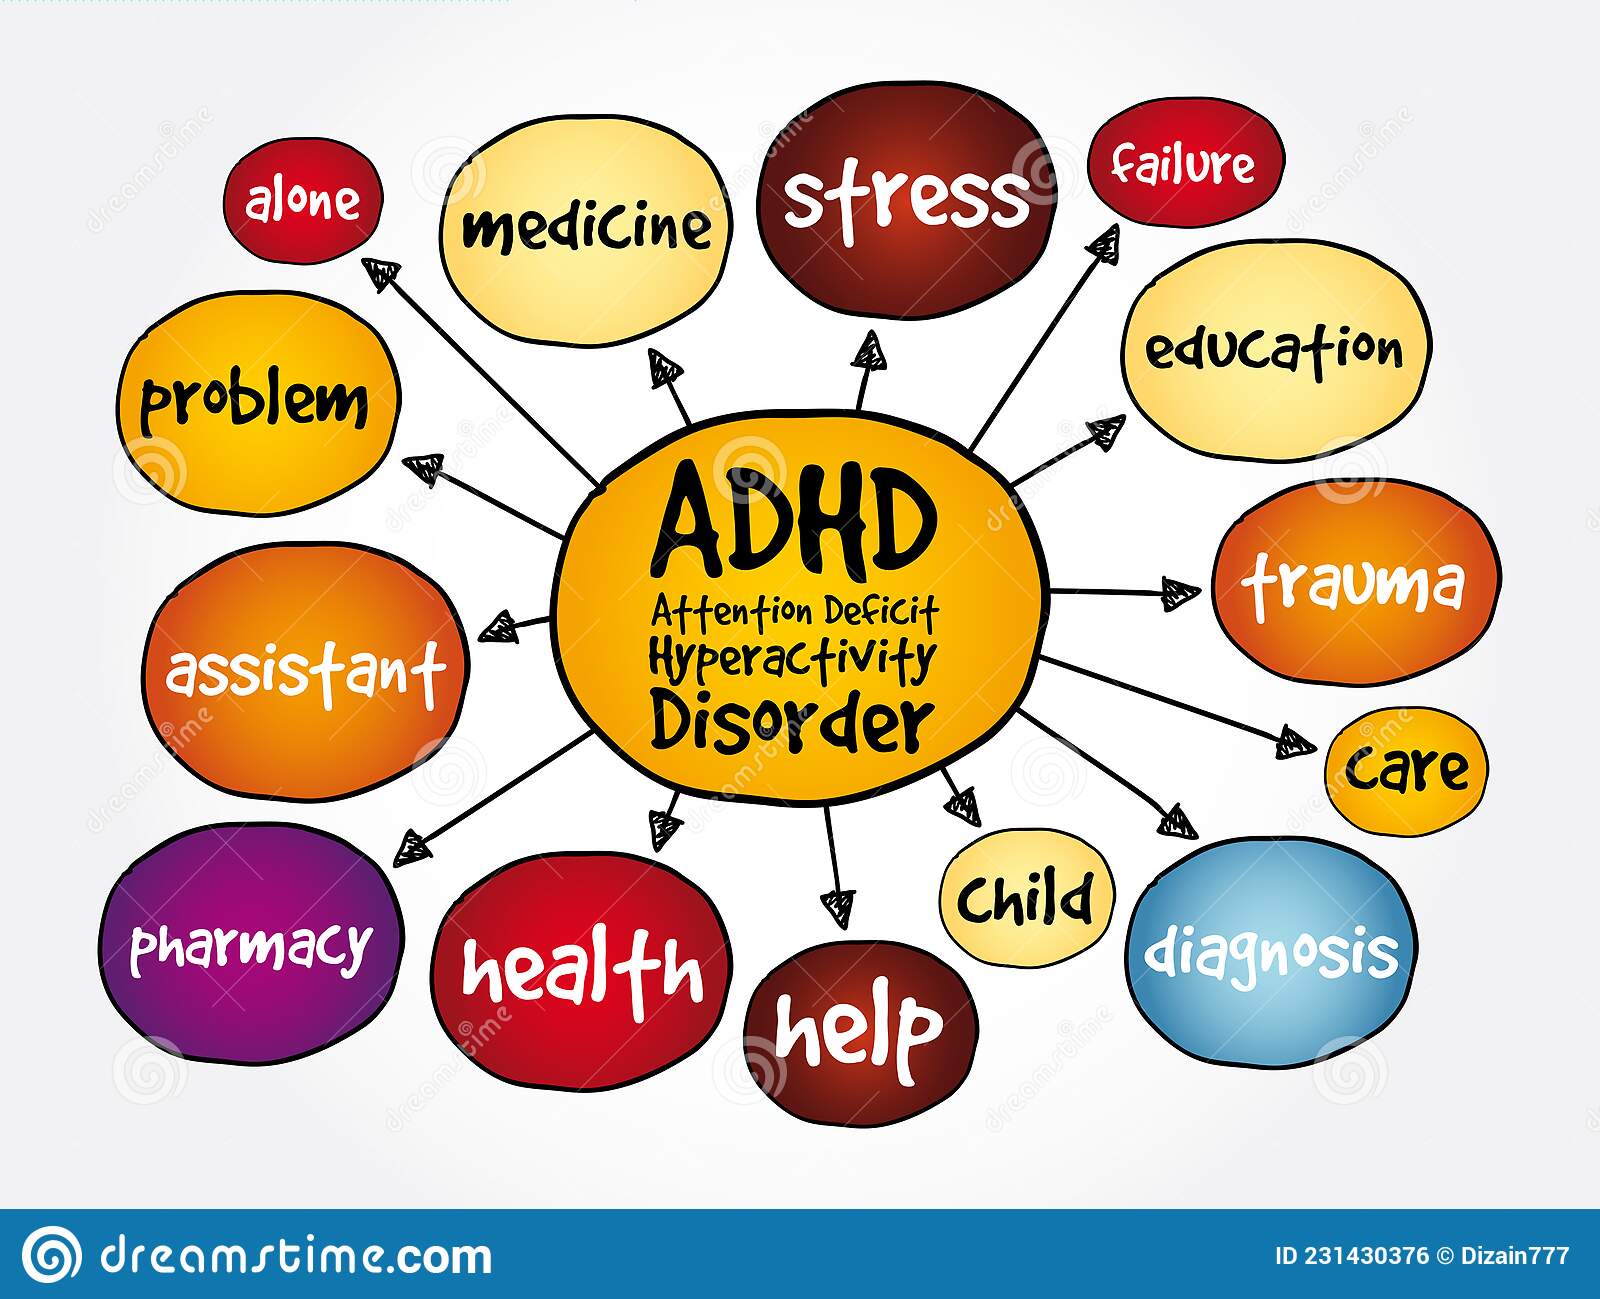 what are the 3 presentations of adhd